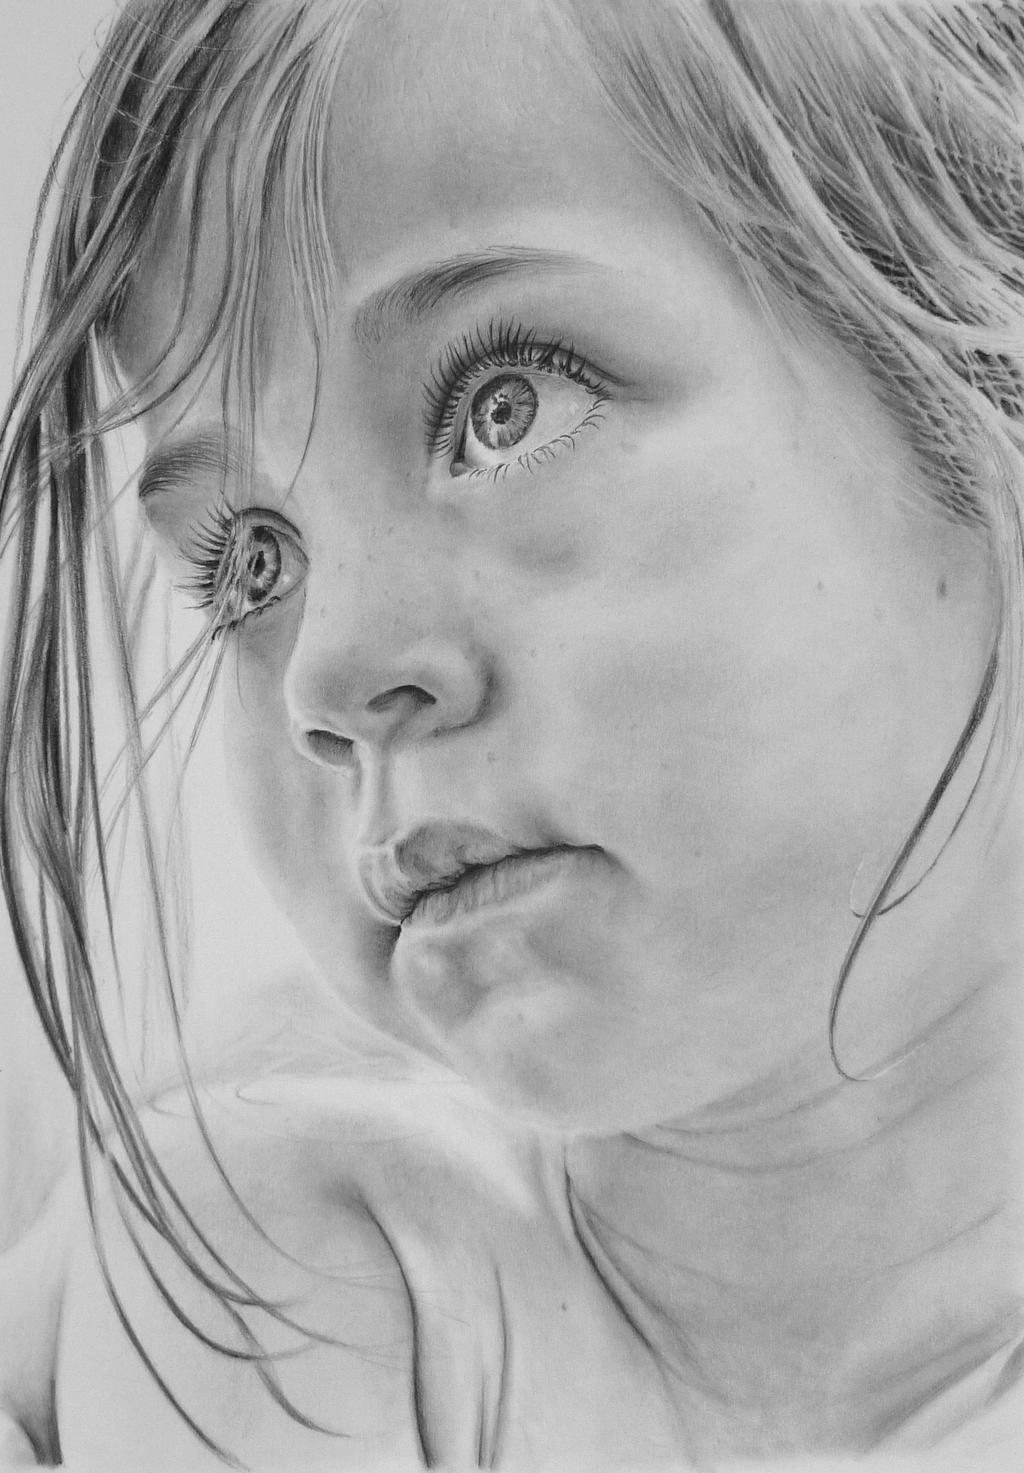 Girl Alone Pencil Drawing - A4 size